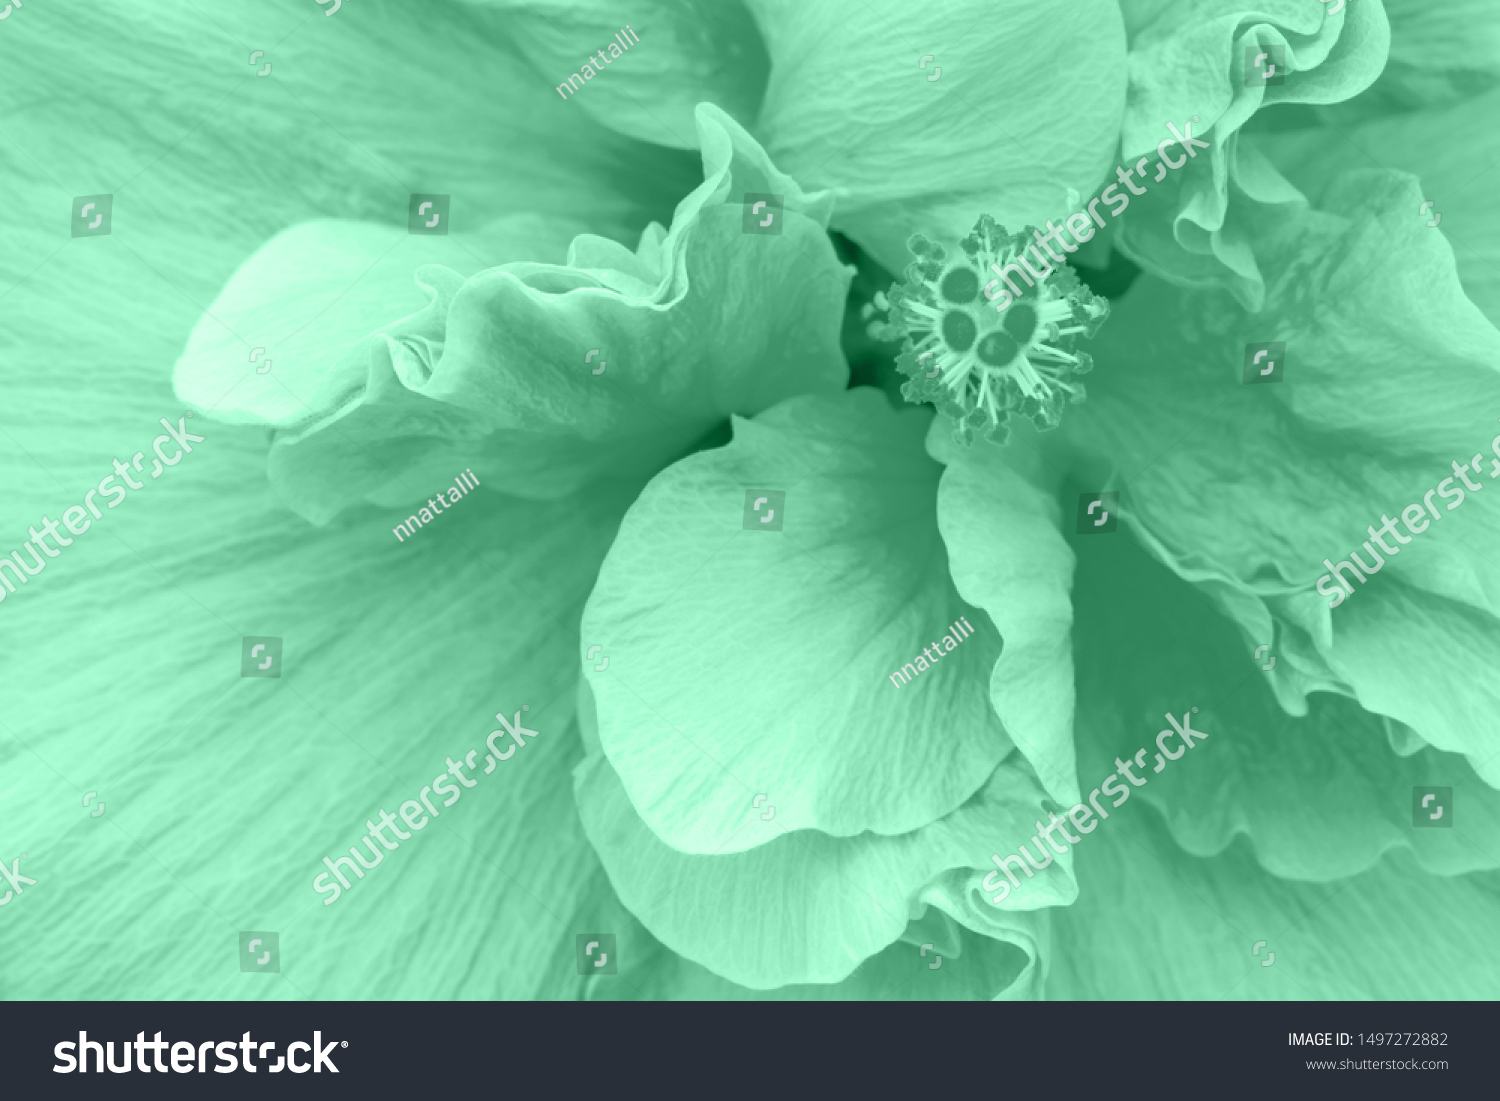 Color Trend 2020 Neo Mint Abstractảnh Có Sẵn1497272882 | Shutterstock